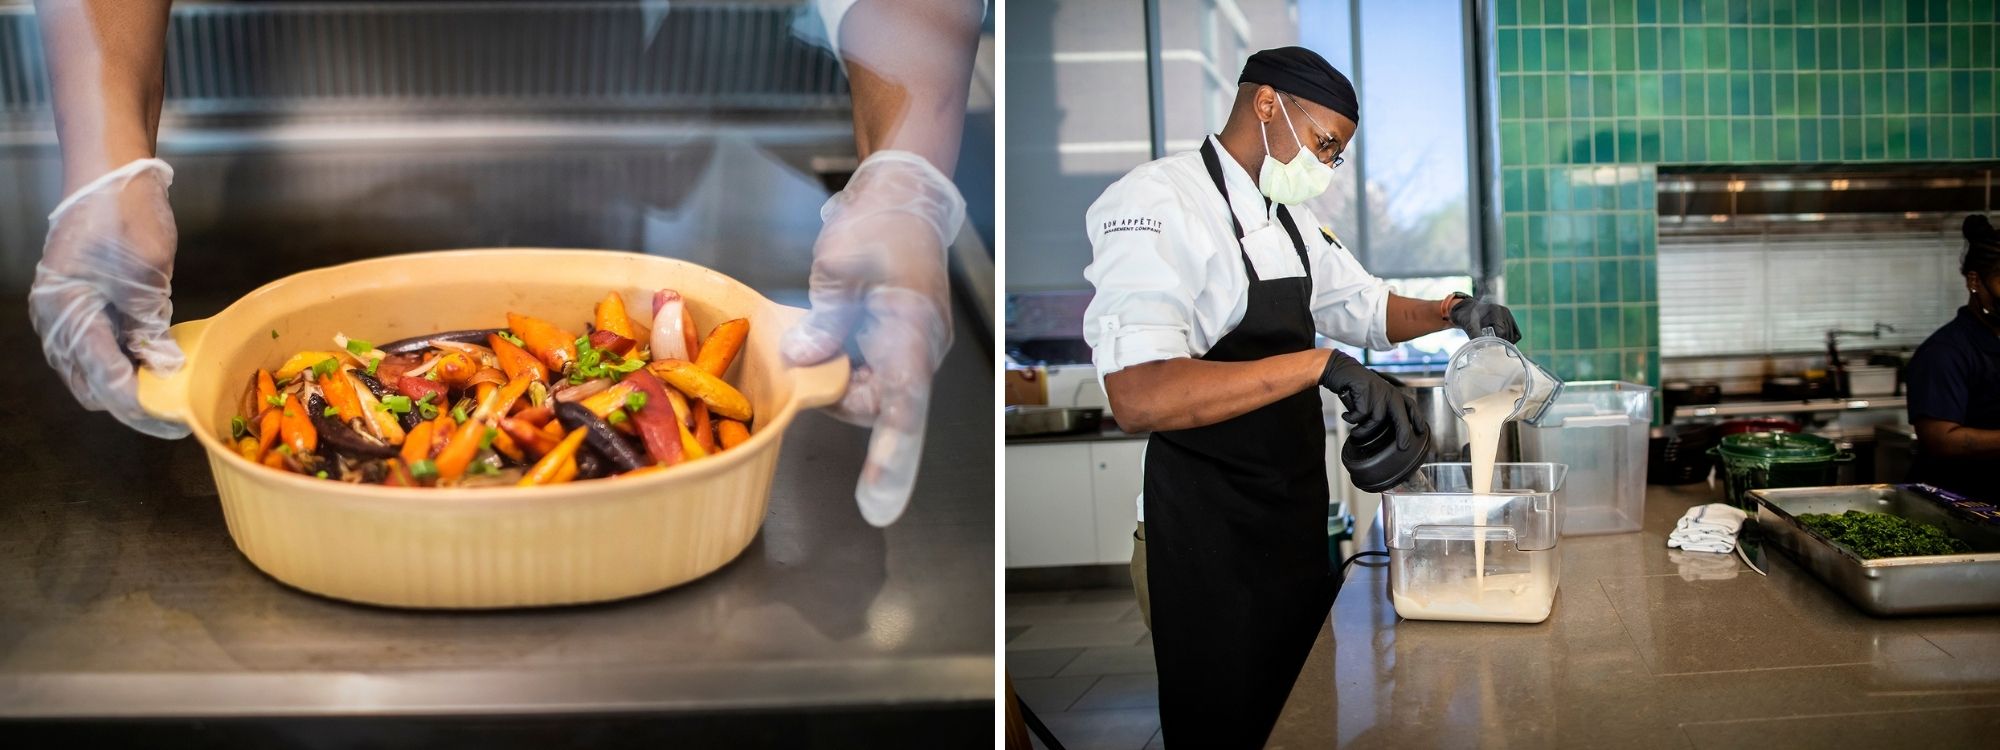 Left: Gloved hands holding a casserole dish of roasted carrots. Right: A chef in a kitchen pours batter into a container.